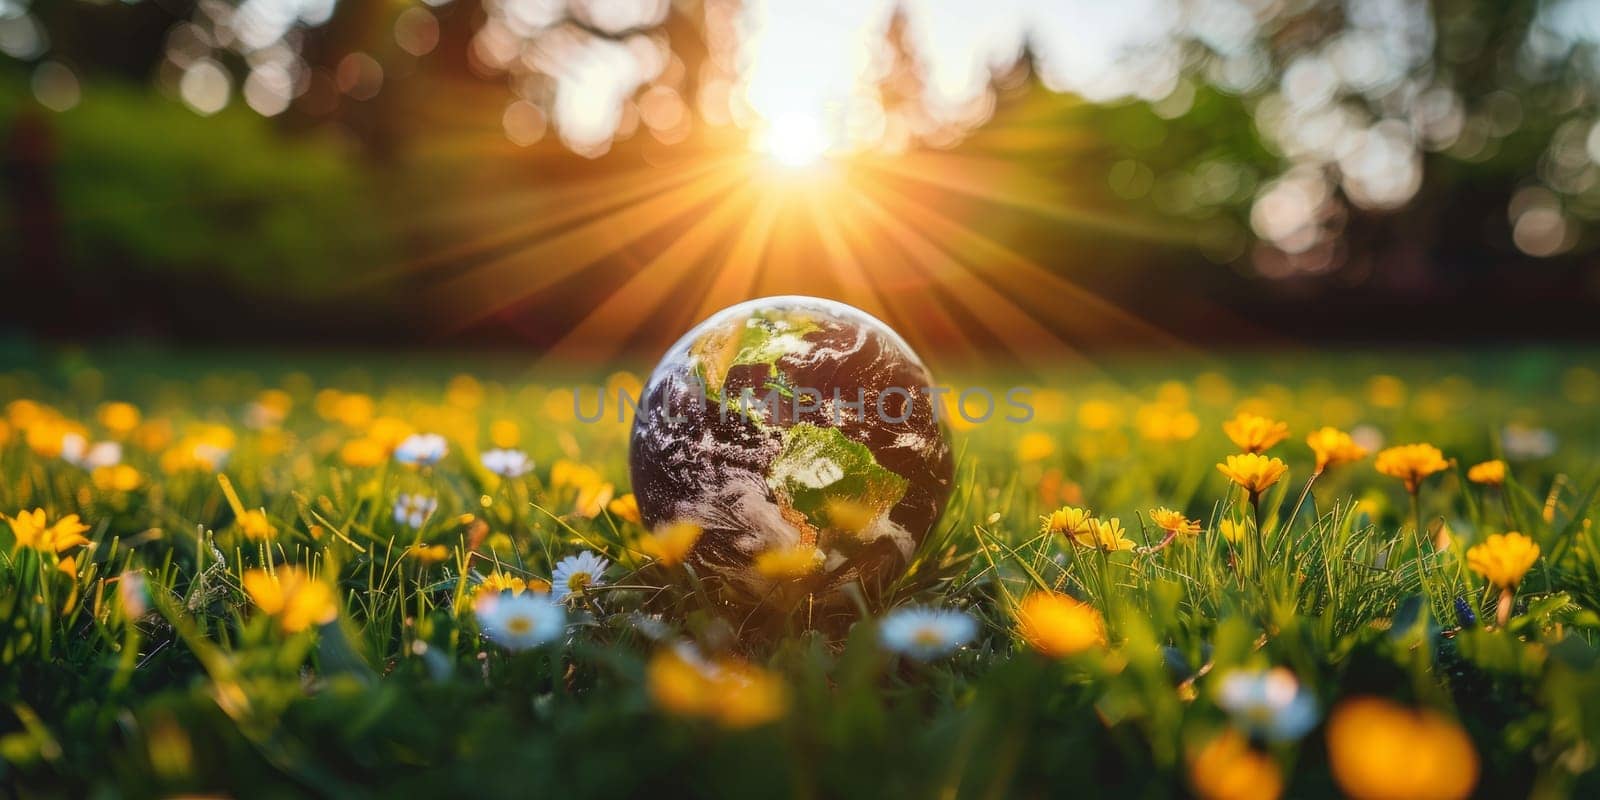 Close up of planet Earth sitting in a lush green field of grass and flowers with a warm sunset in the background. Earth day concept